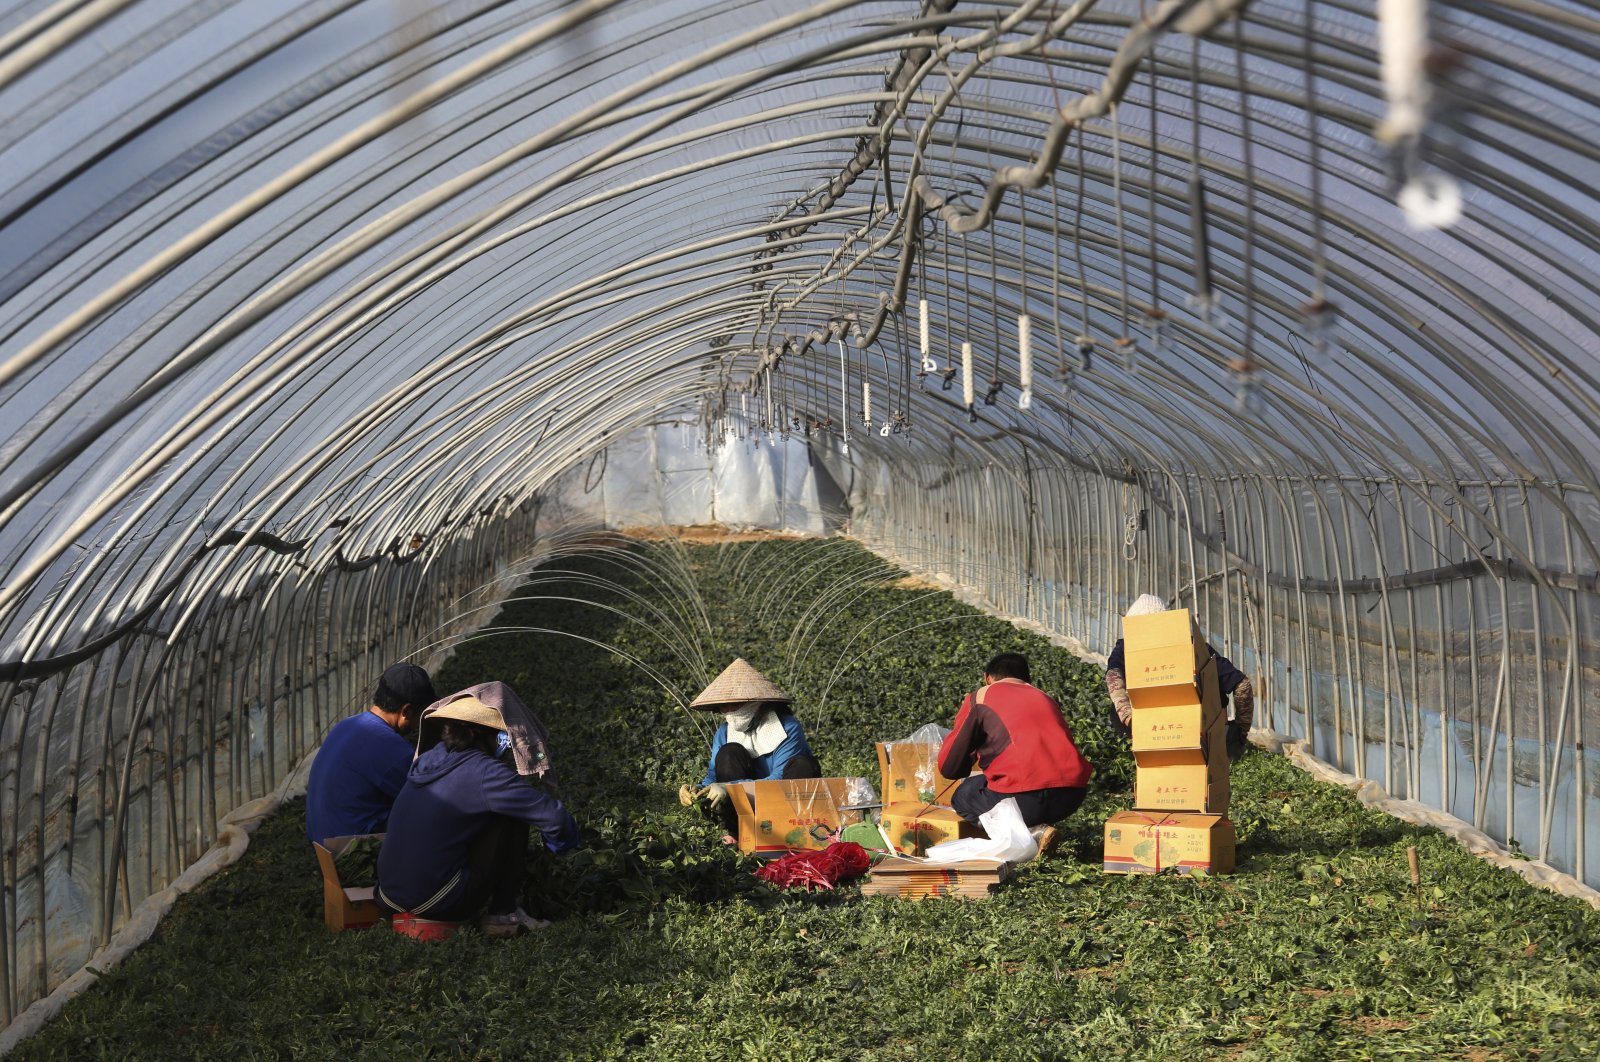 Migrant workers work inside a greenhouse at a farm in Pocheon, South Korea, Feb. 8, 2021. (AP Photo)